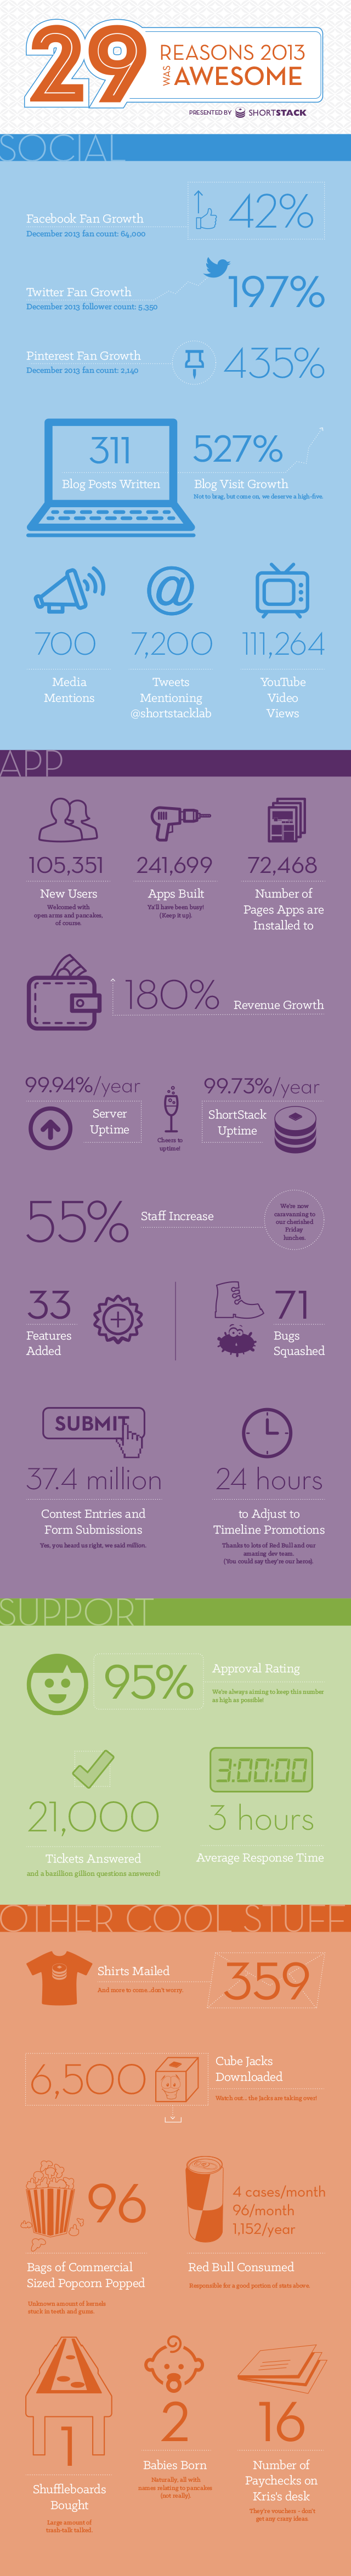 ShortStack Releases 2013 Annual Report via Infographic